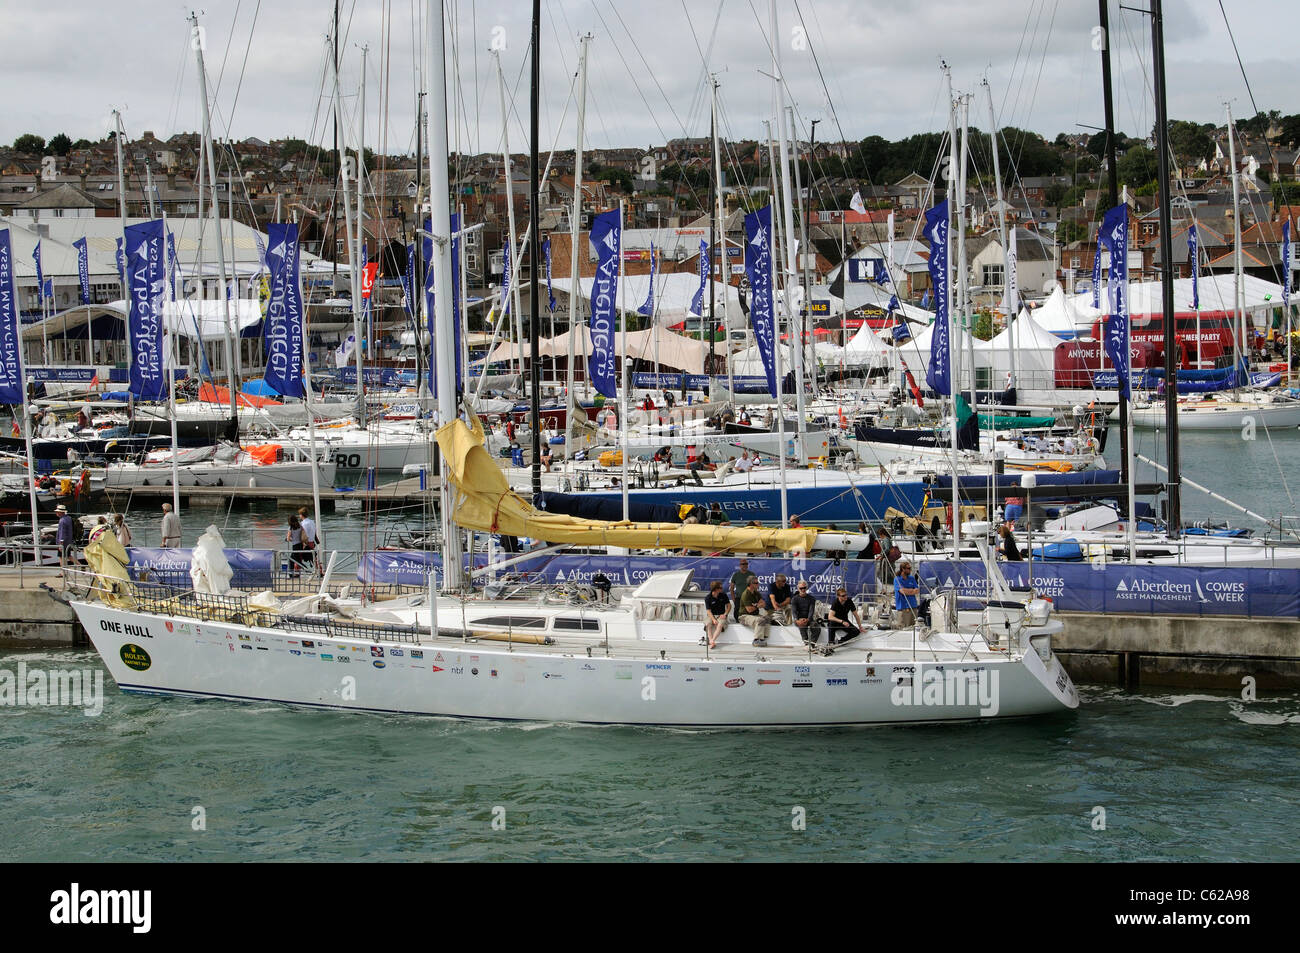 Rolex Fastnet Race competitors in Cowes IOW One Hull a Challenger 72 type yacht with crew relaxing on the River Medina in Cowes Stock Photo